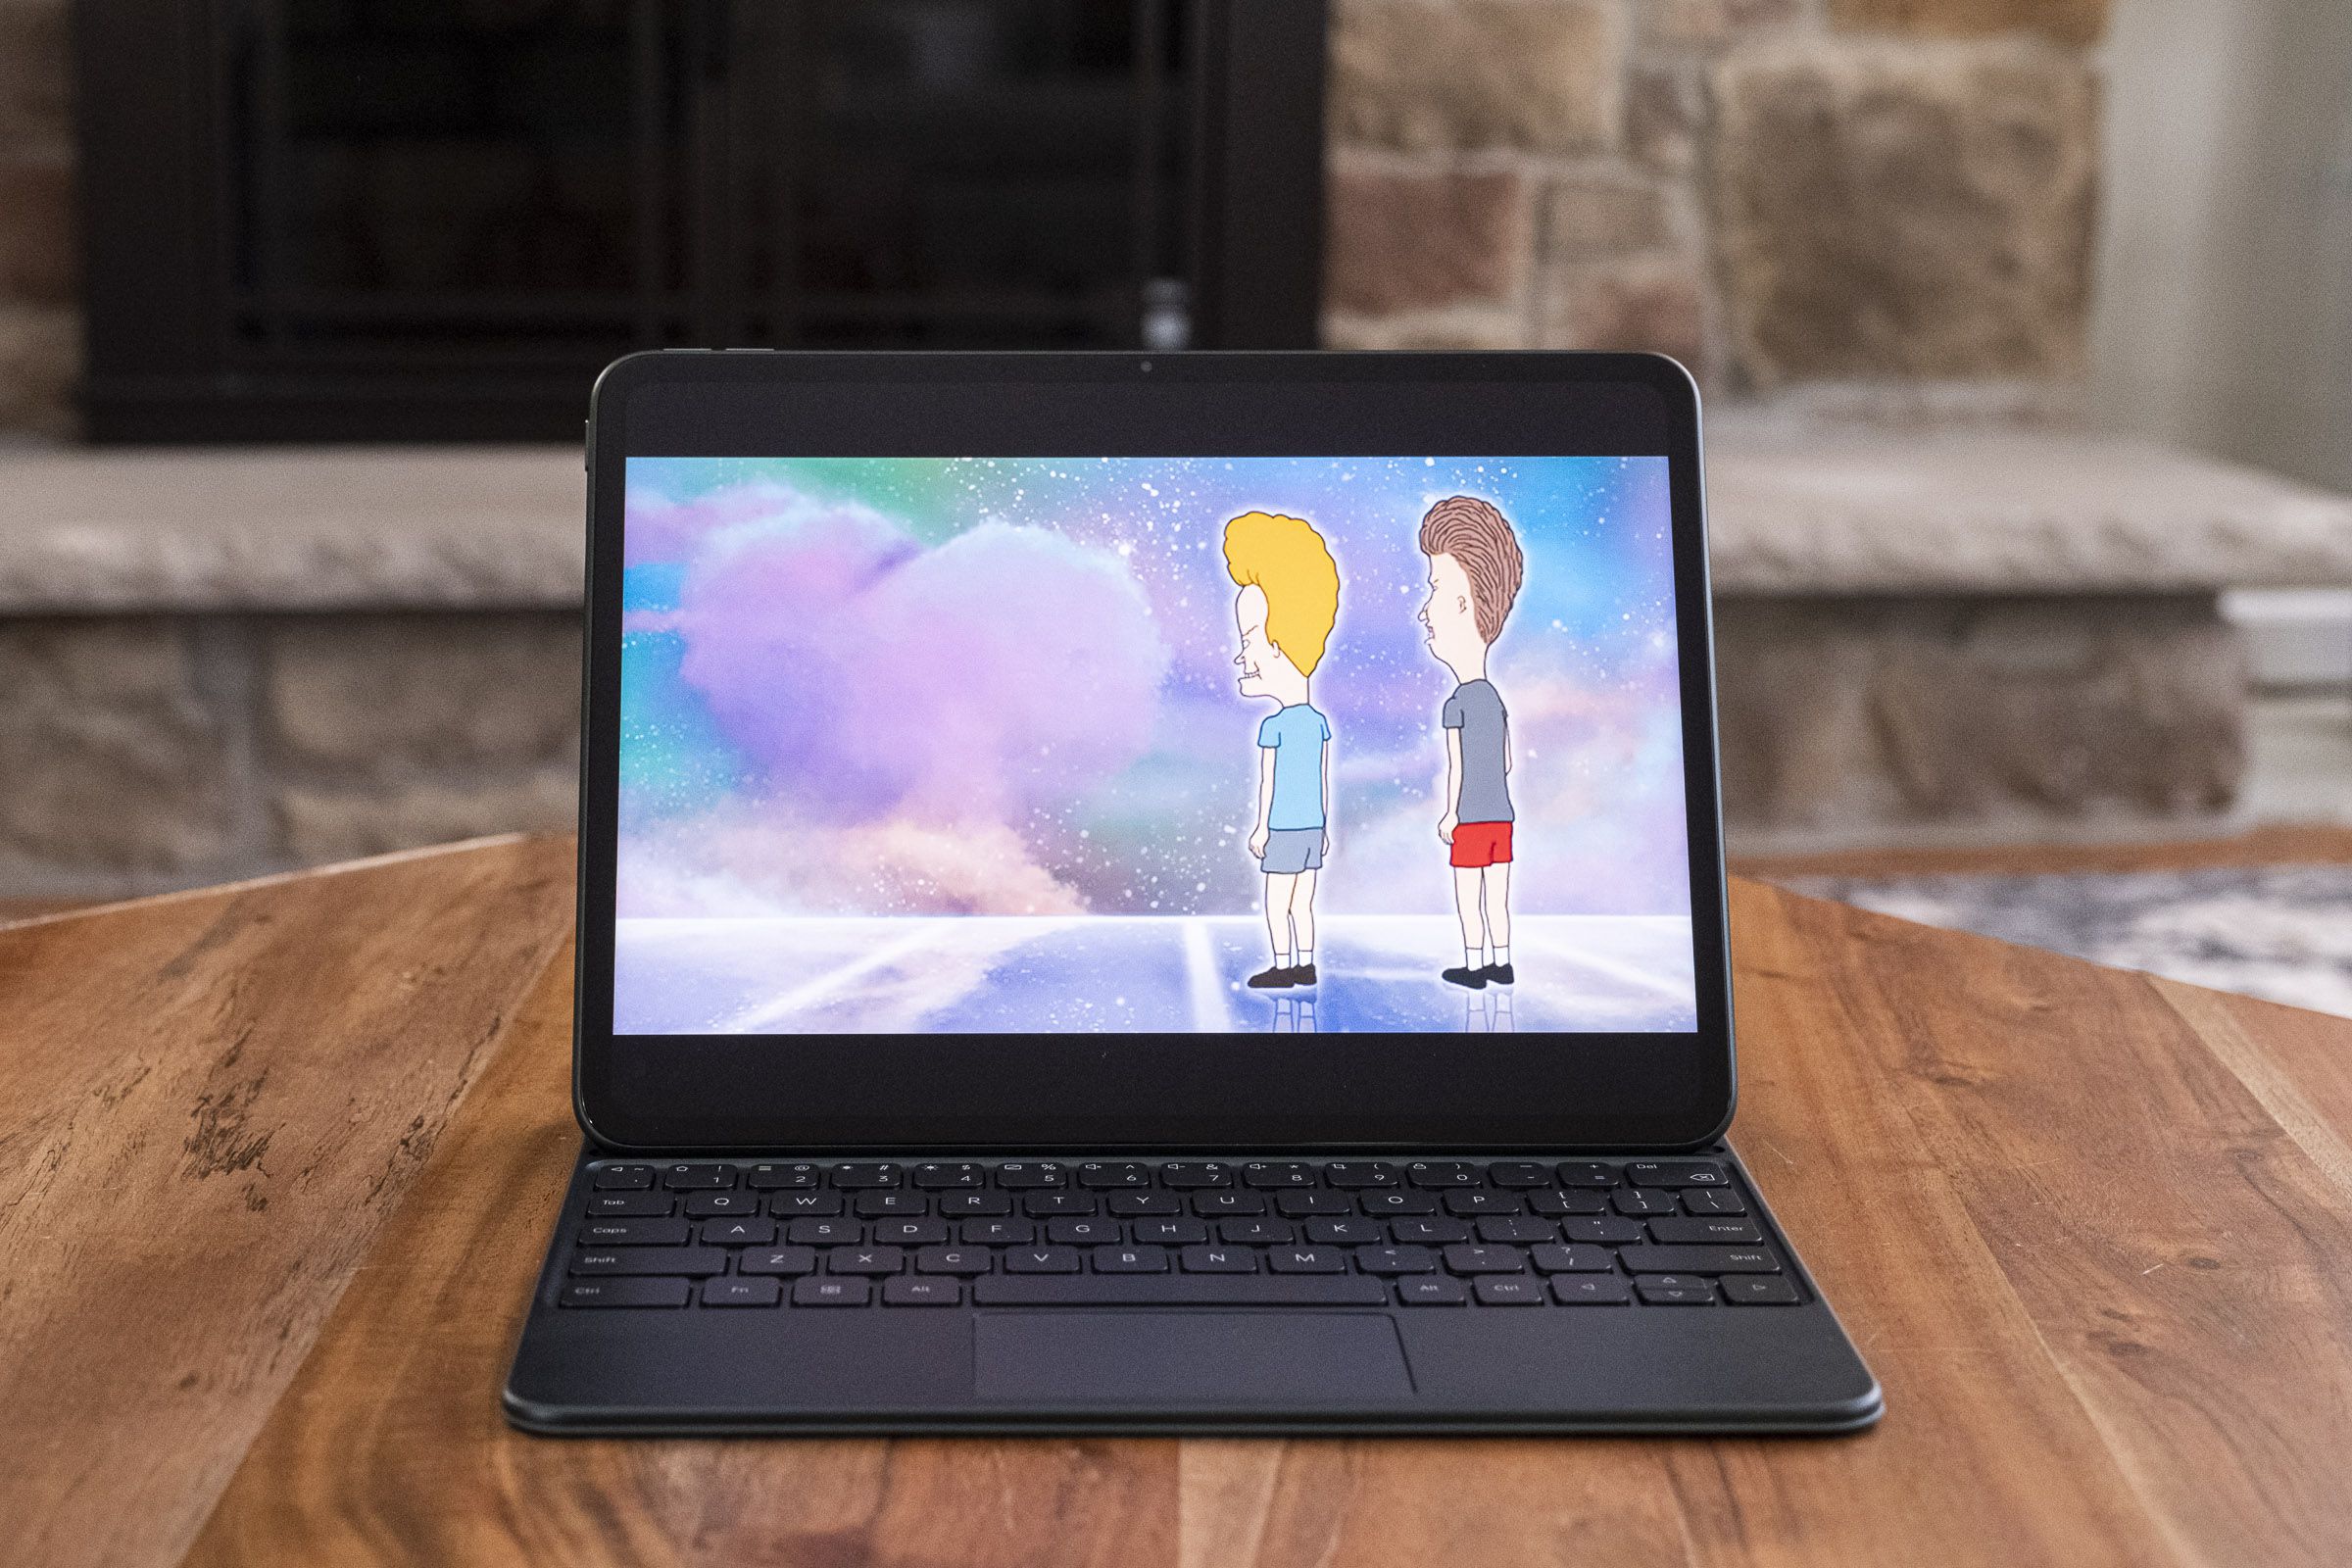 Beavis and Butt-head on the OnePlus Pad